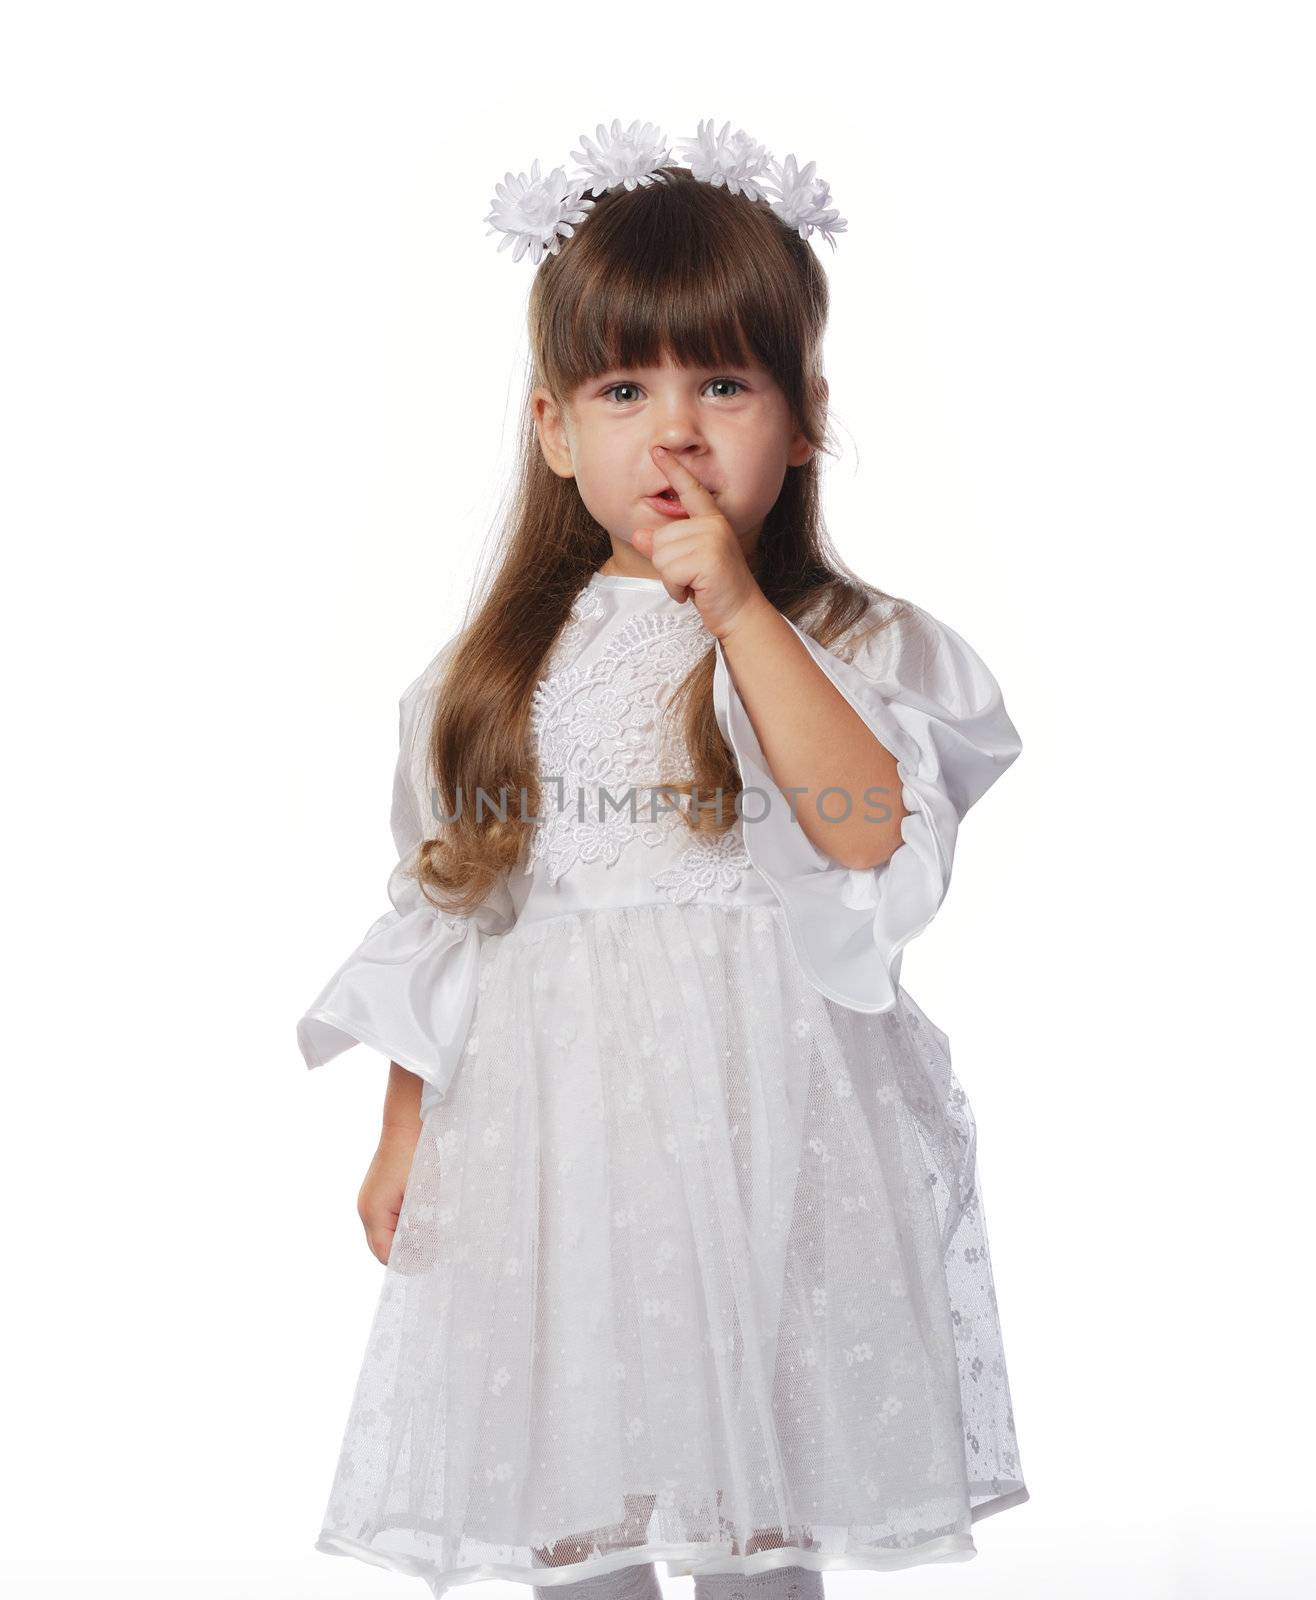 The girl in a white dress. It is isolated on a white background. Age 3 years